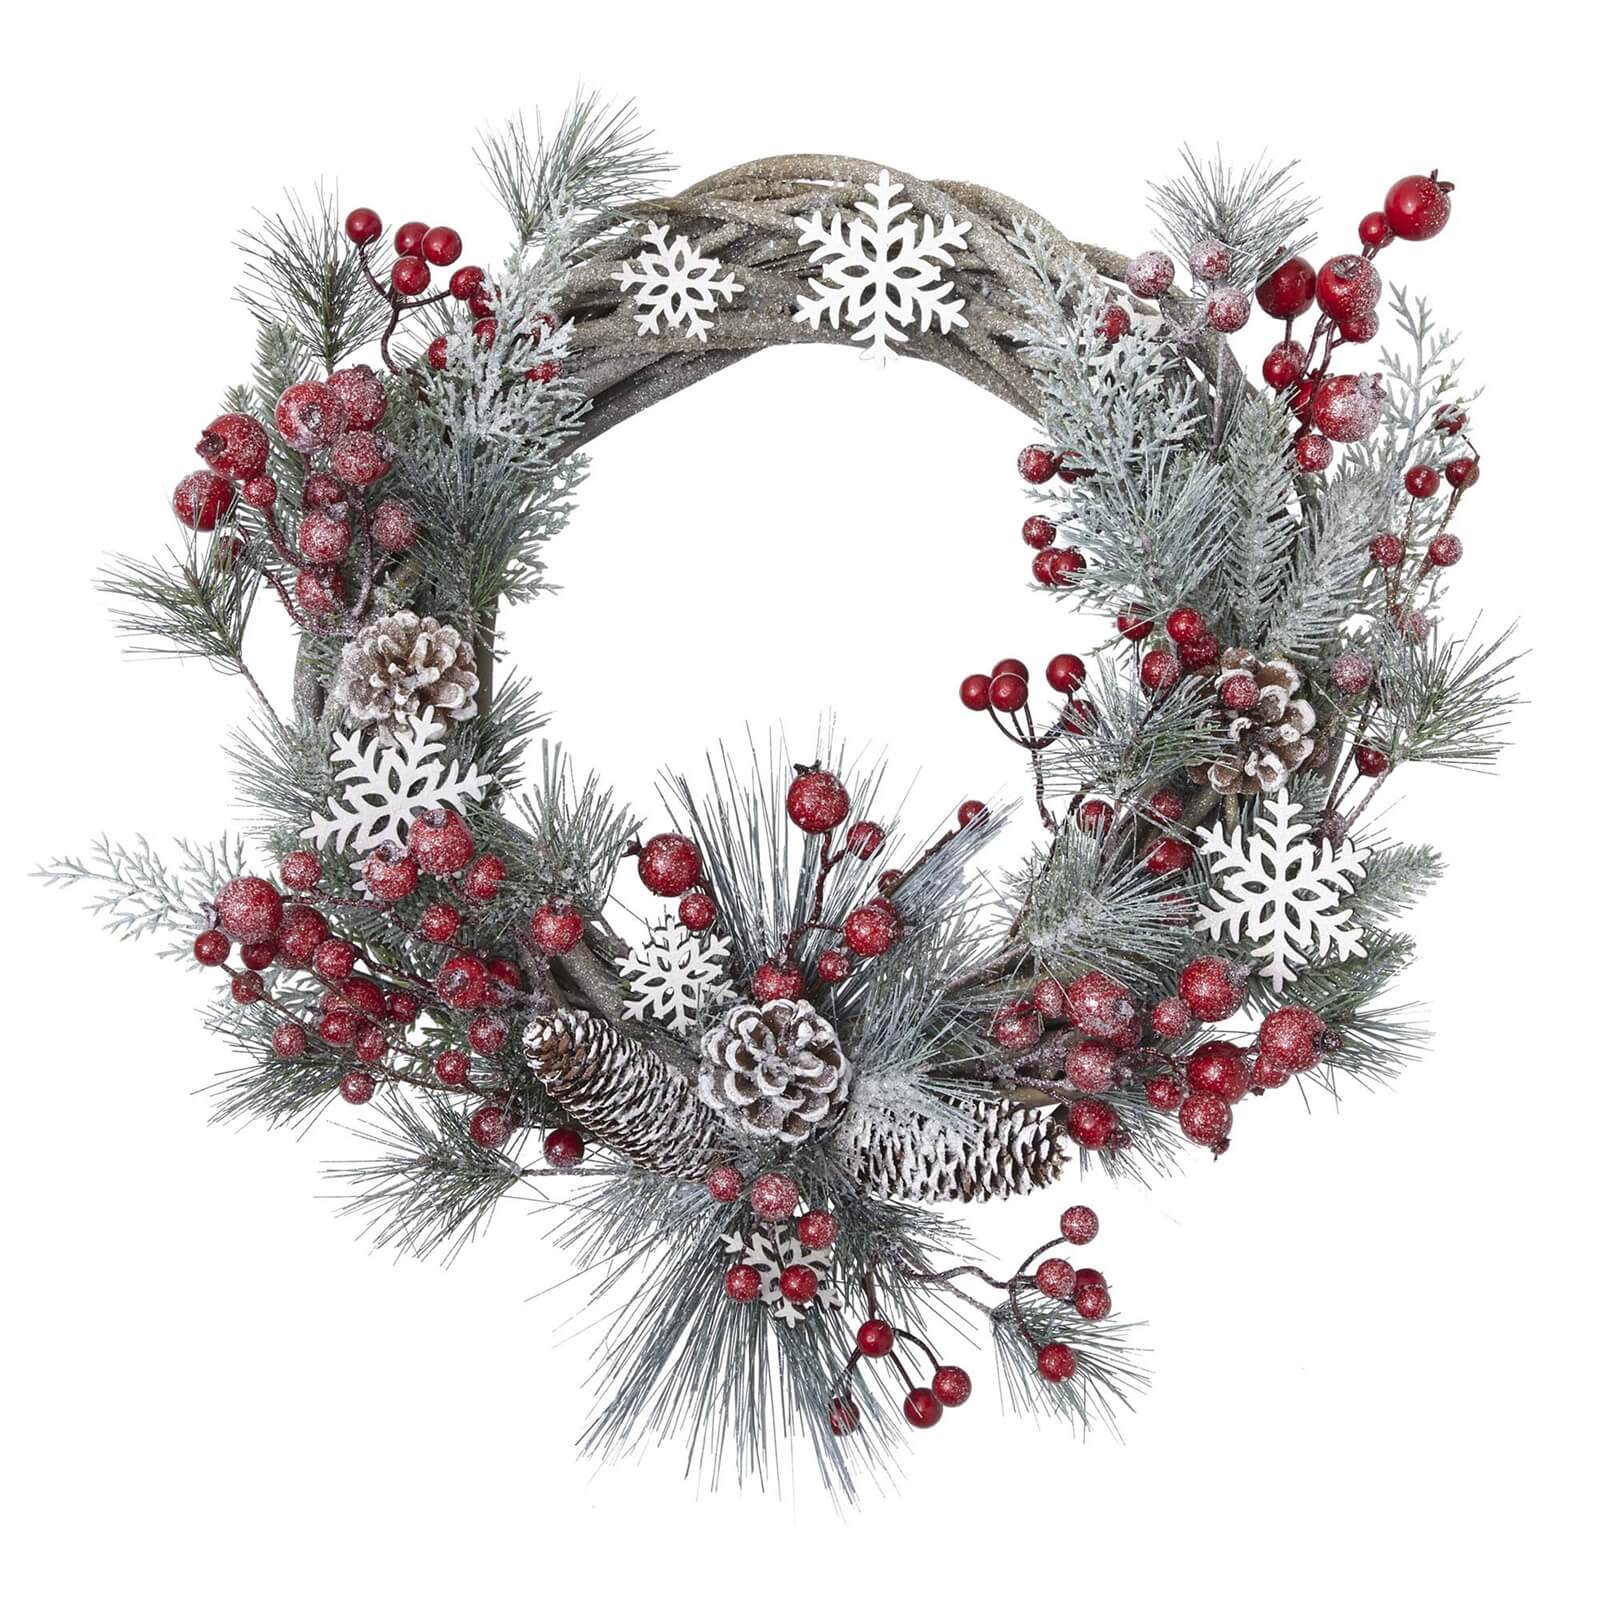 Willow, Berries and Stars Christmas Wreath - 50cm